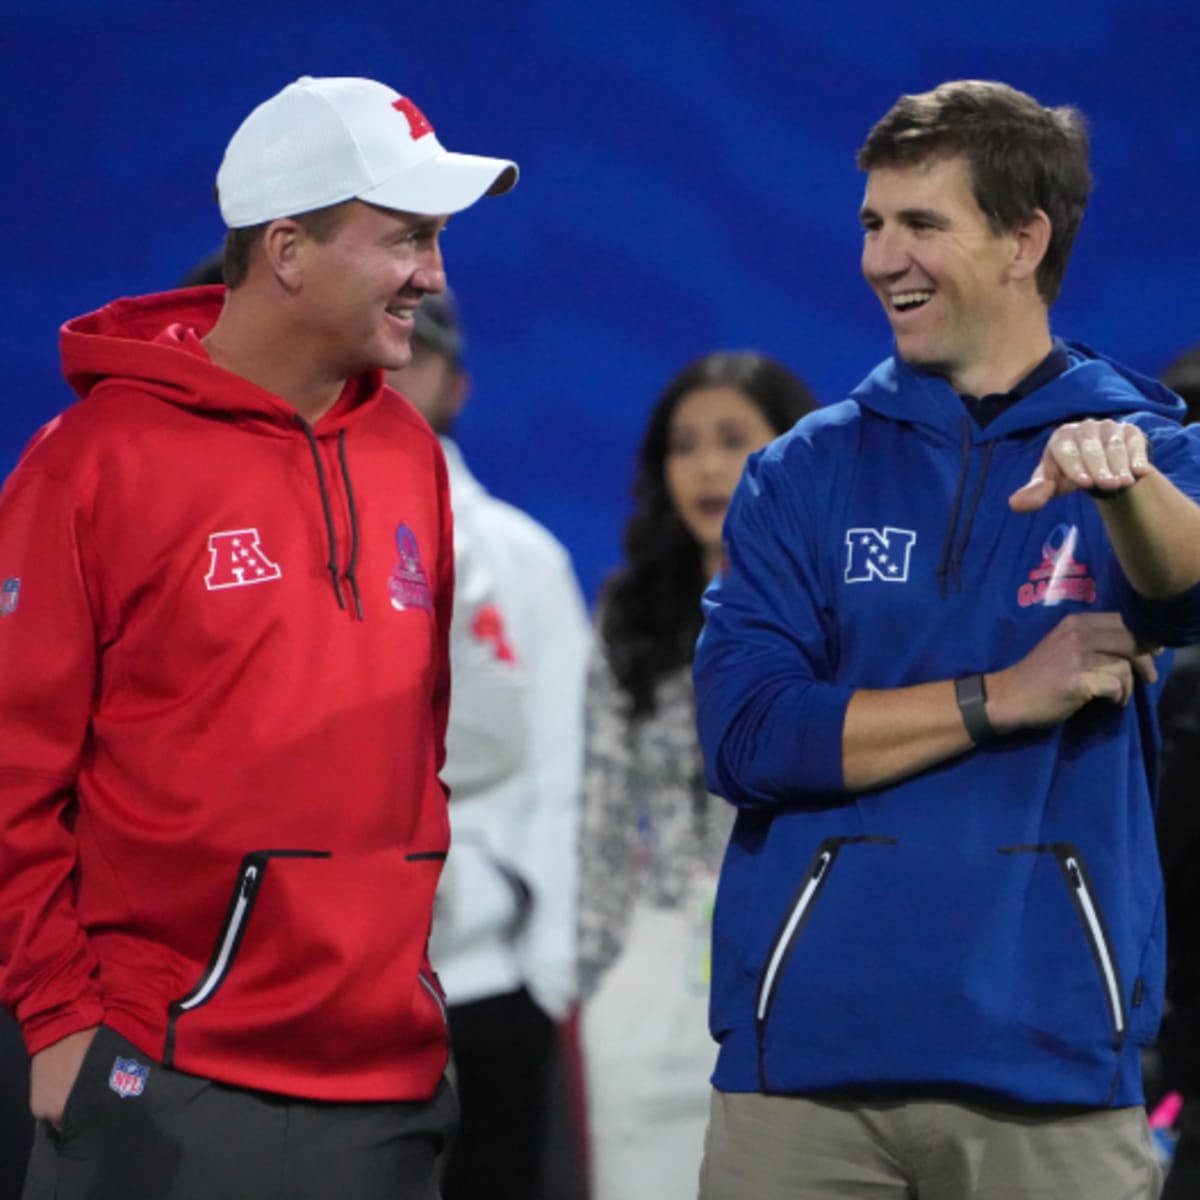 ManningCast News: Eli Manning Says Broadcast Won't Change Much in 2023 